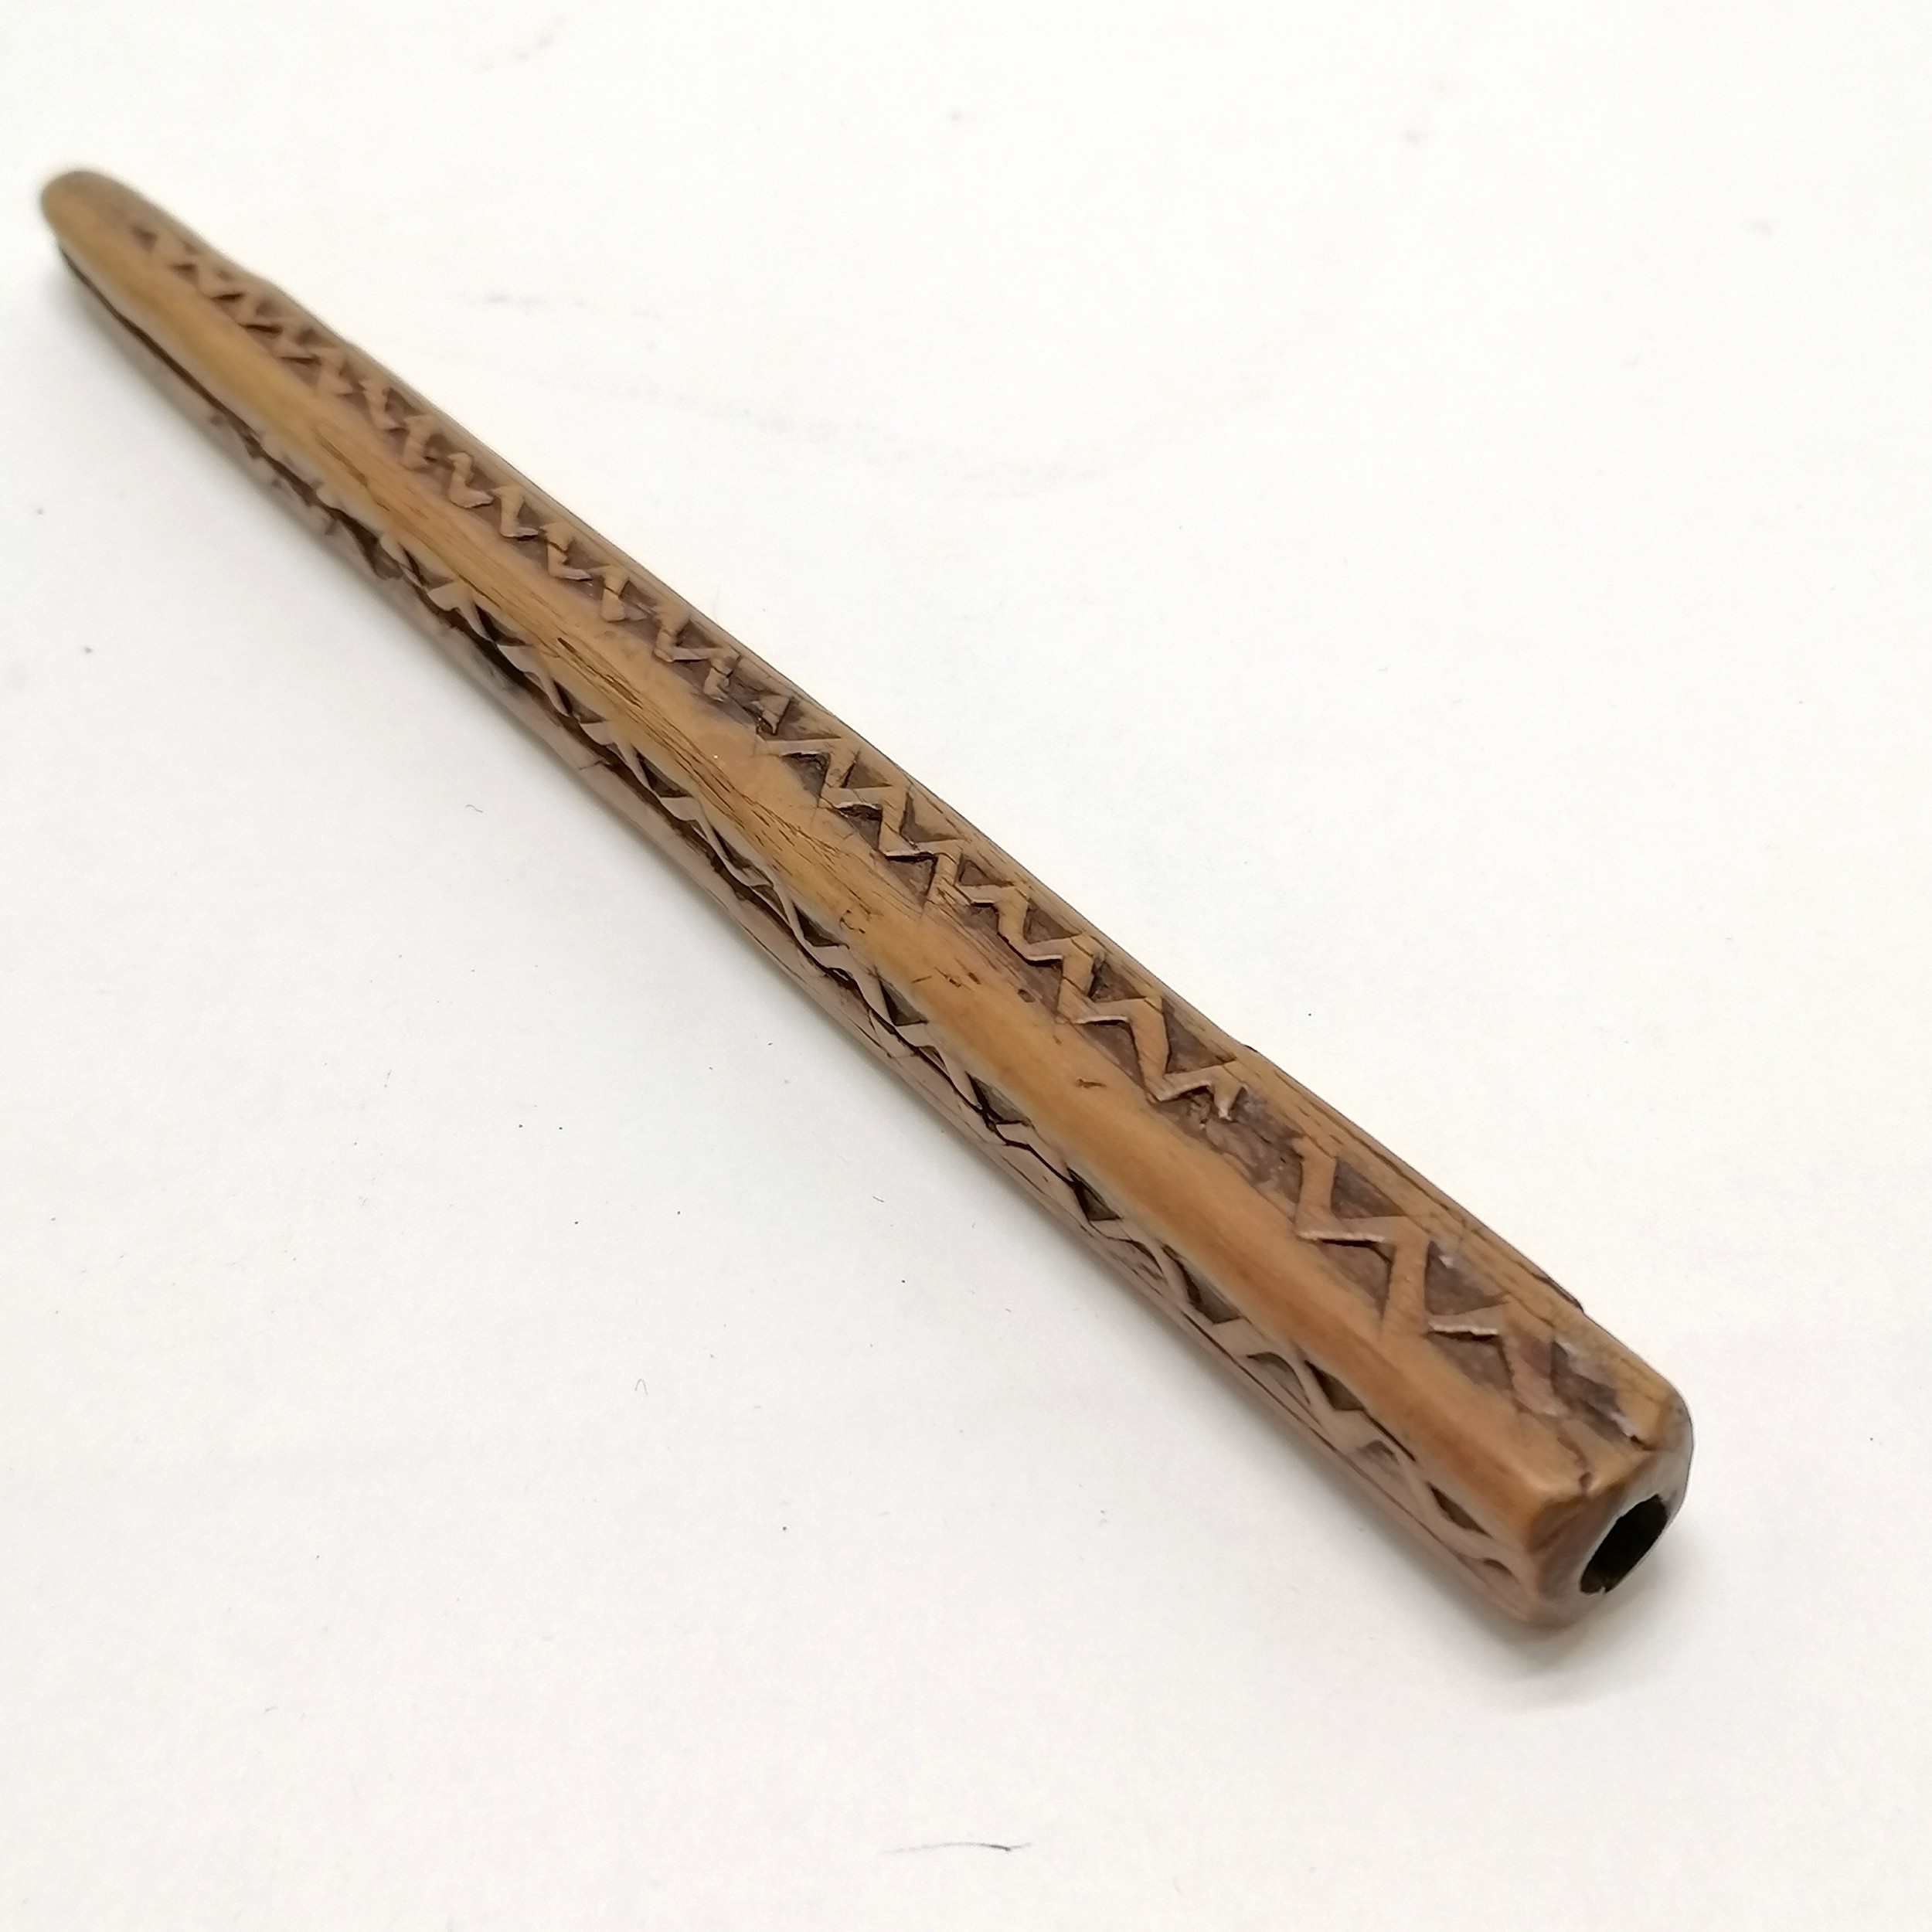 18th century or earlier hand carved treen knitting sheath - 18.5cm and has shrinkage cracks and - Image 2 of 2